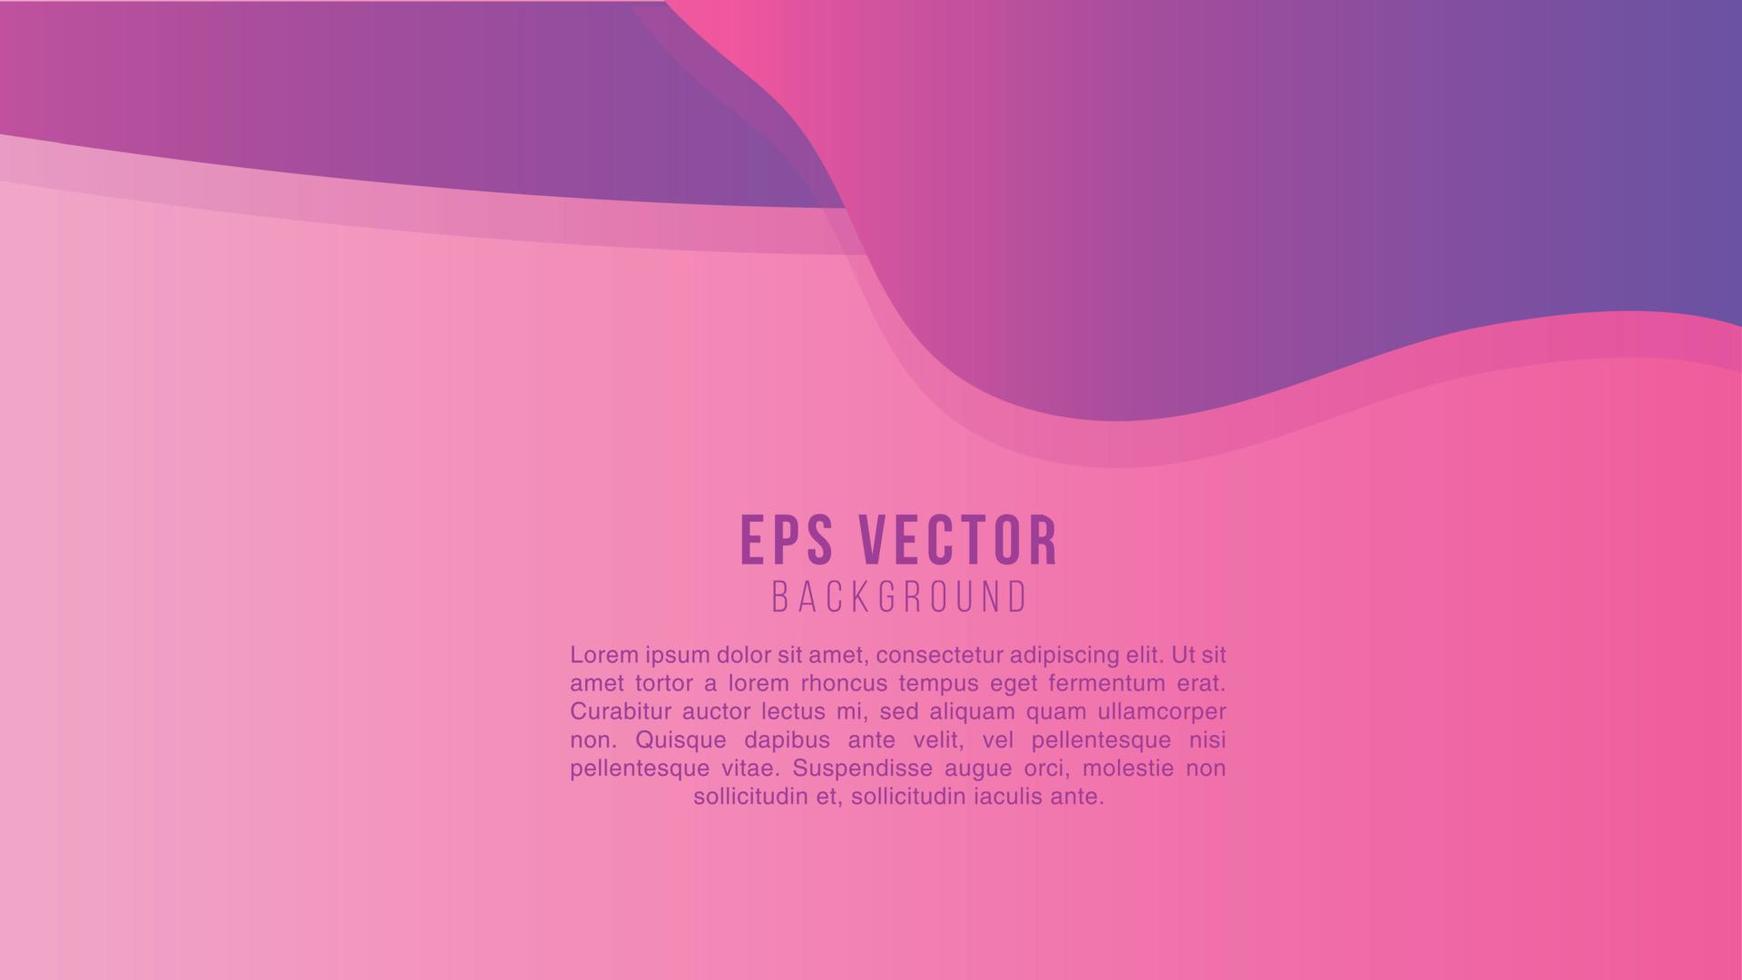 Pink Gradient Line shape Background Abstract EPS Vector